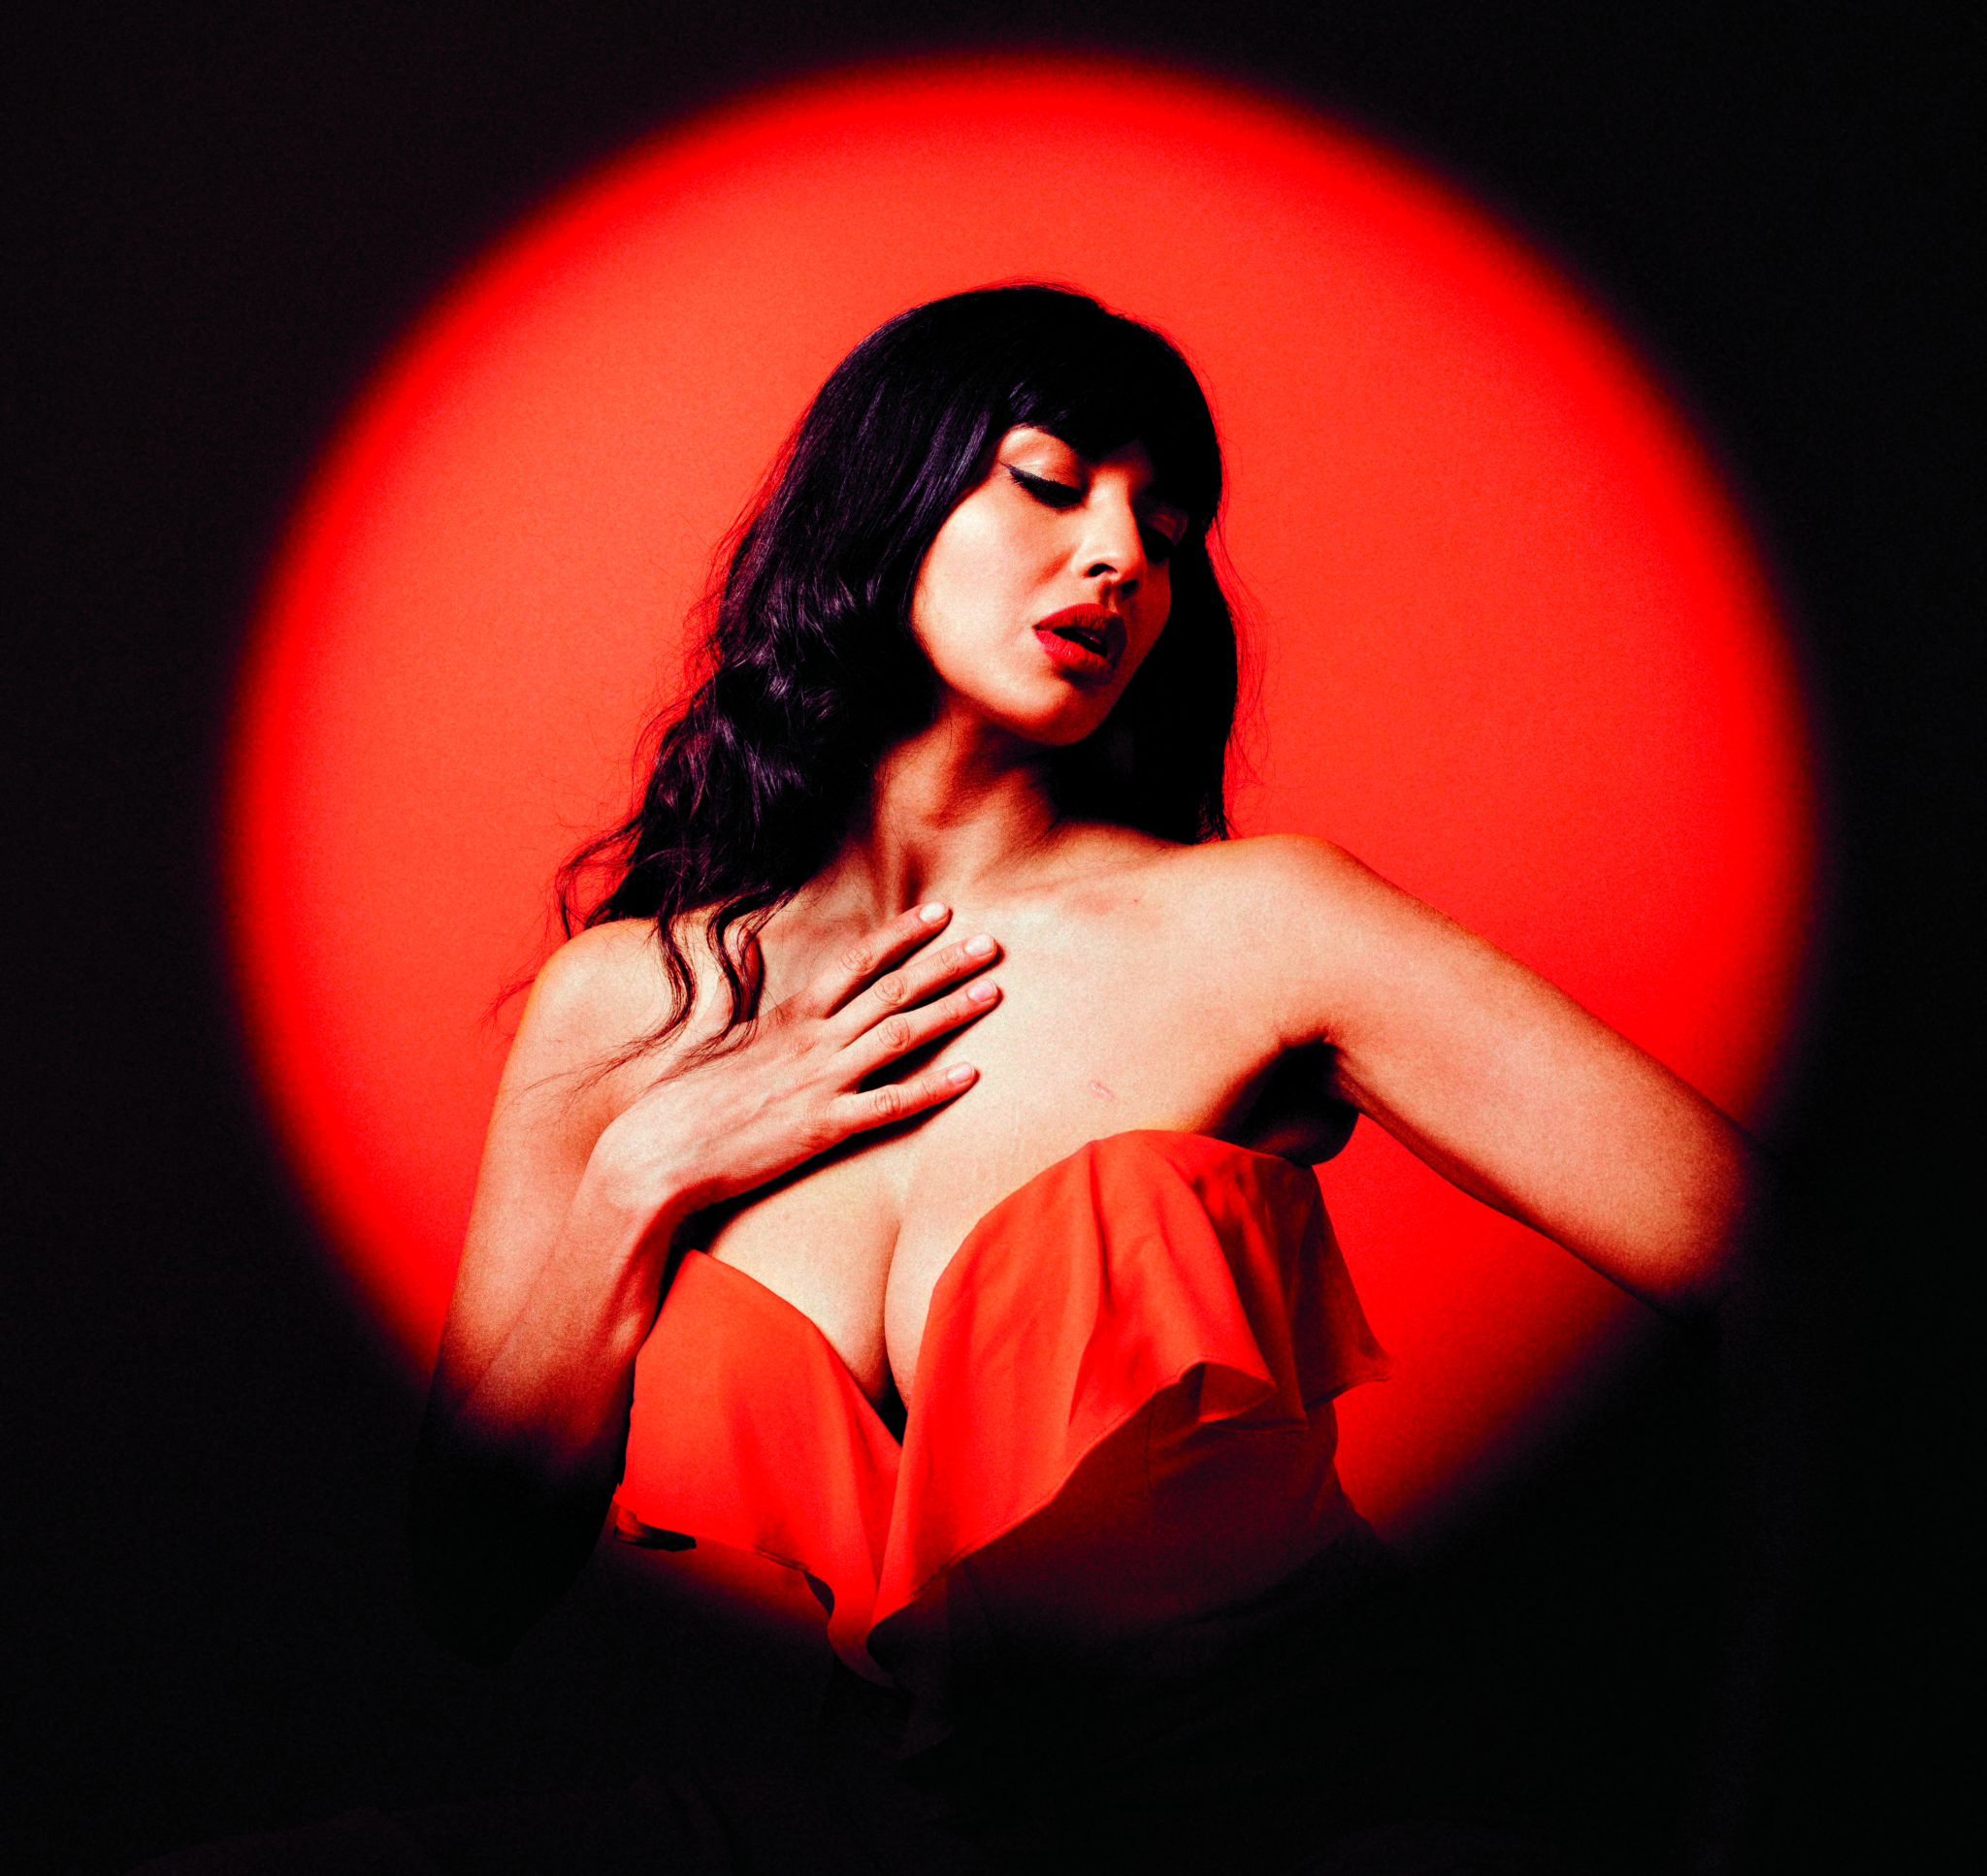 Jameela Jamil on Finding Her Own Self Worth